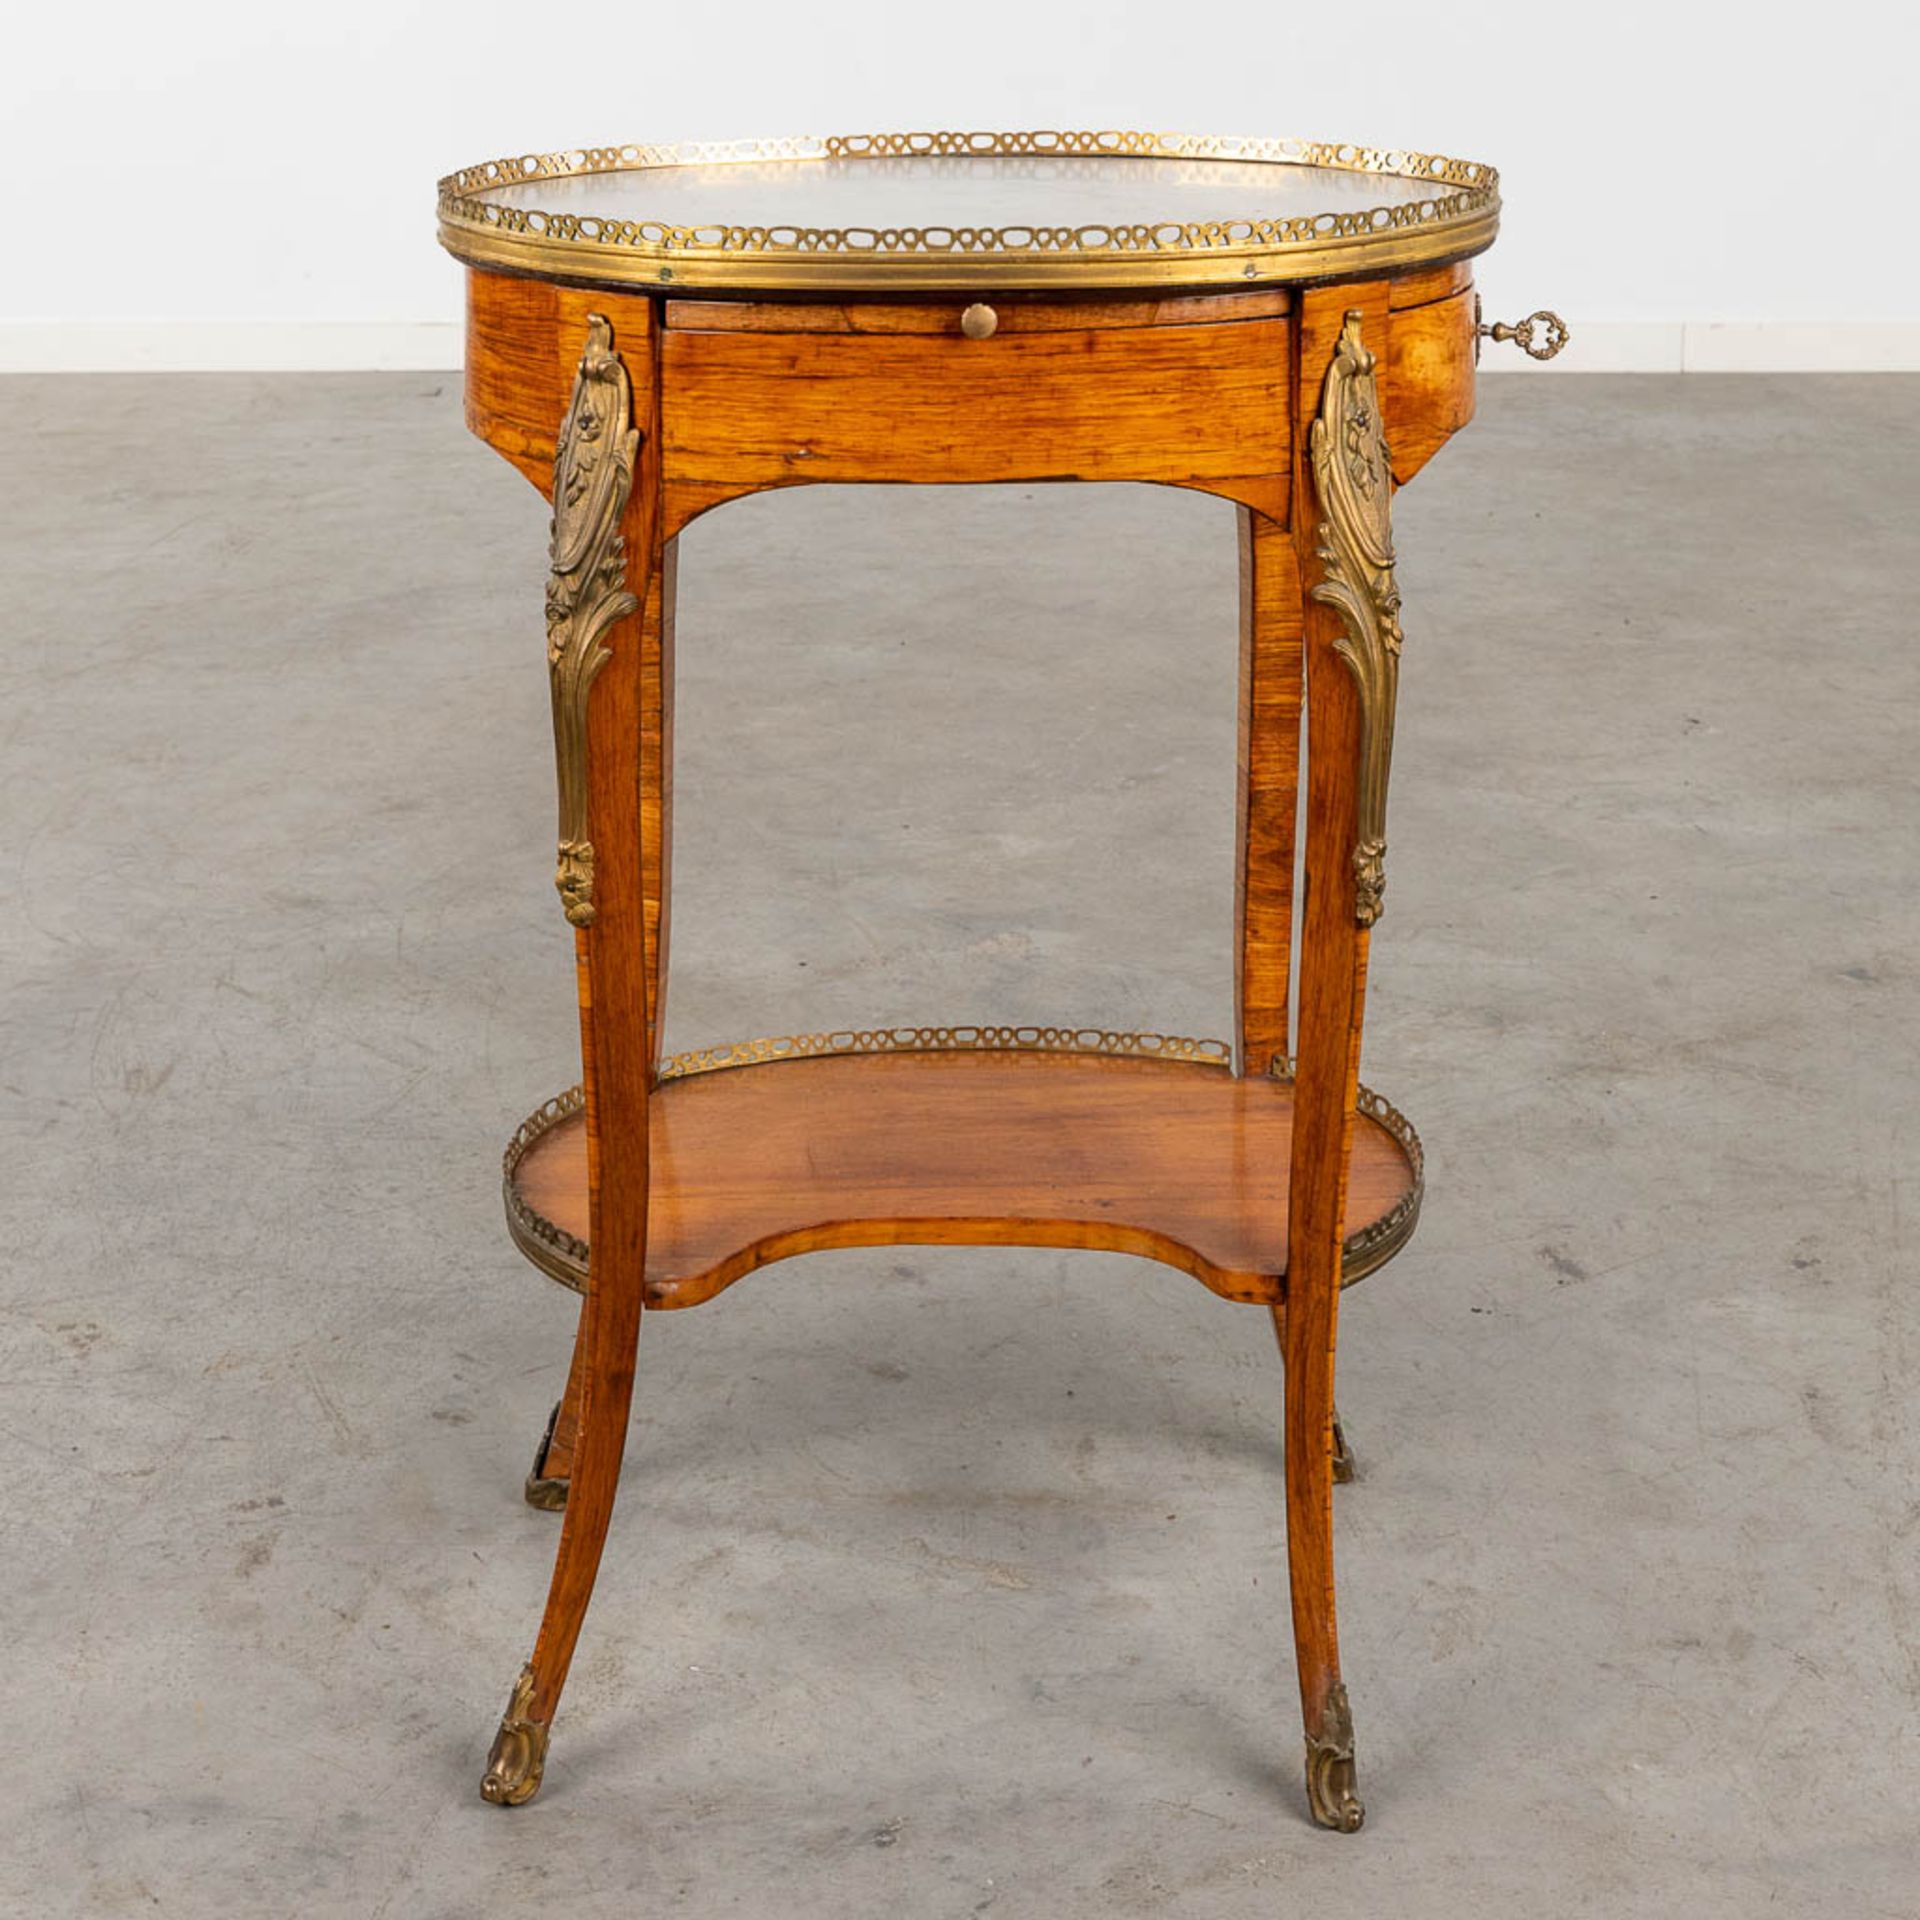 An antique side table, Louis XV, marquetry mounted with bronze and marble, 18th C. (D:38 x W:50 x H: - Image 3 of 14